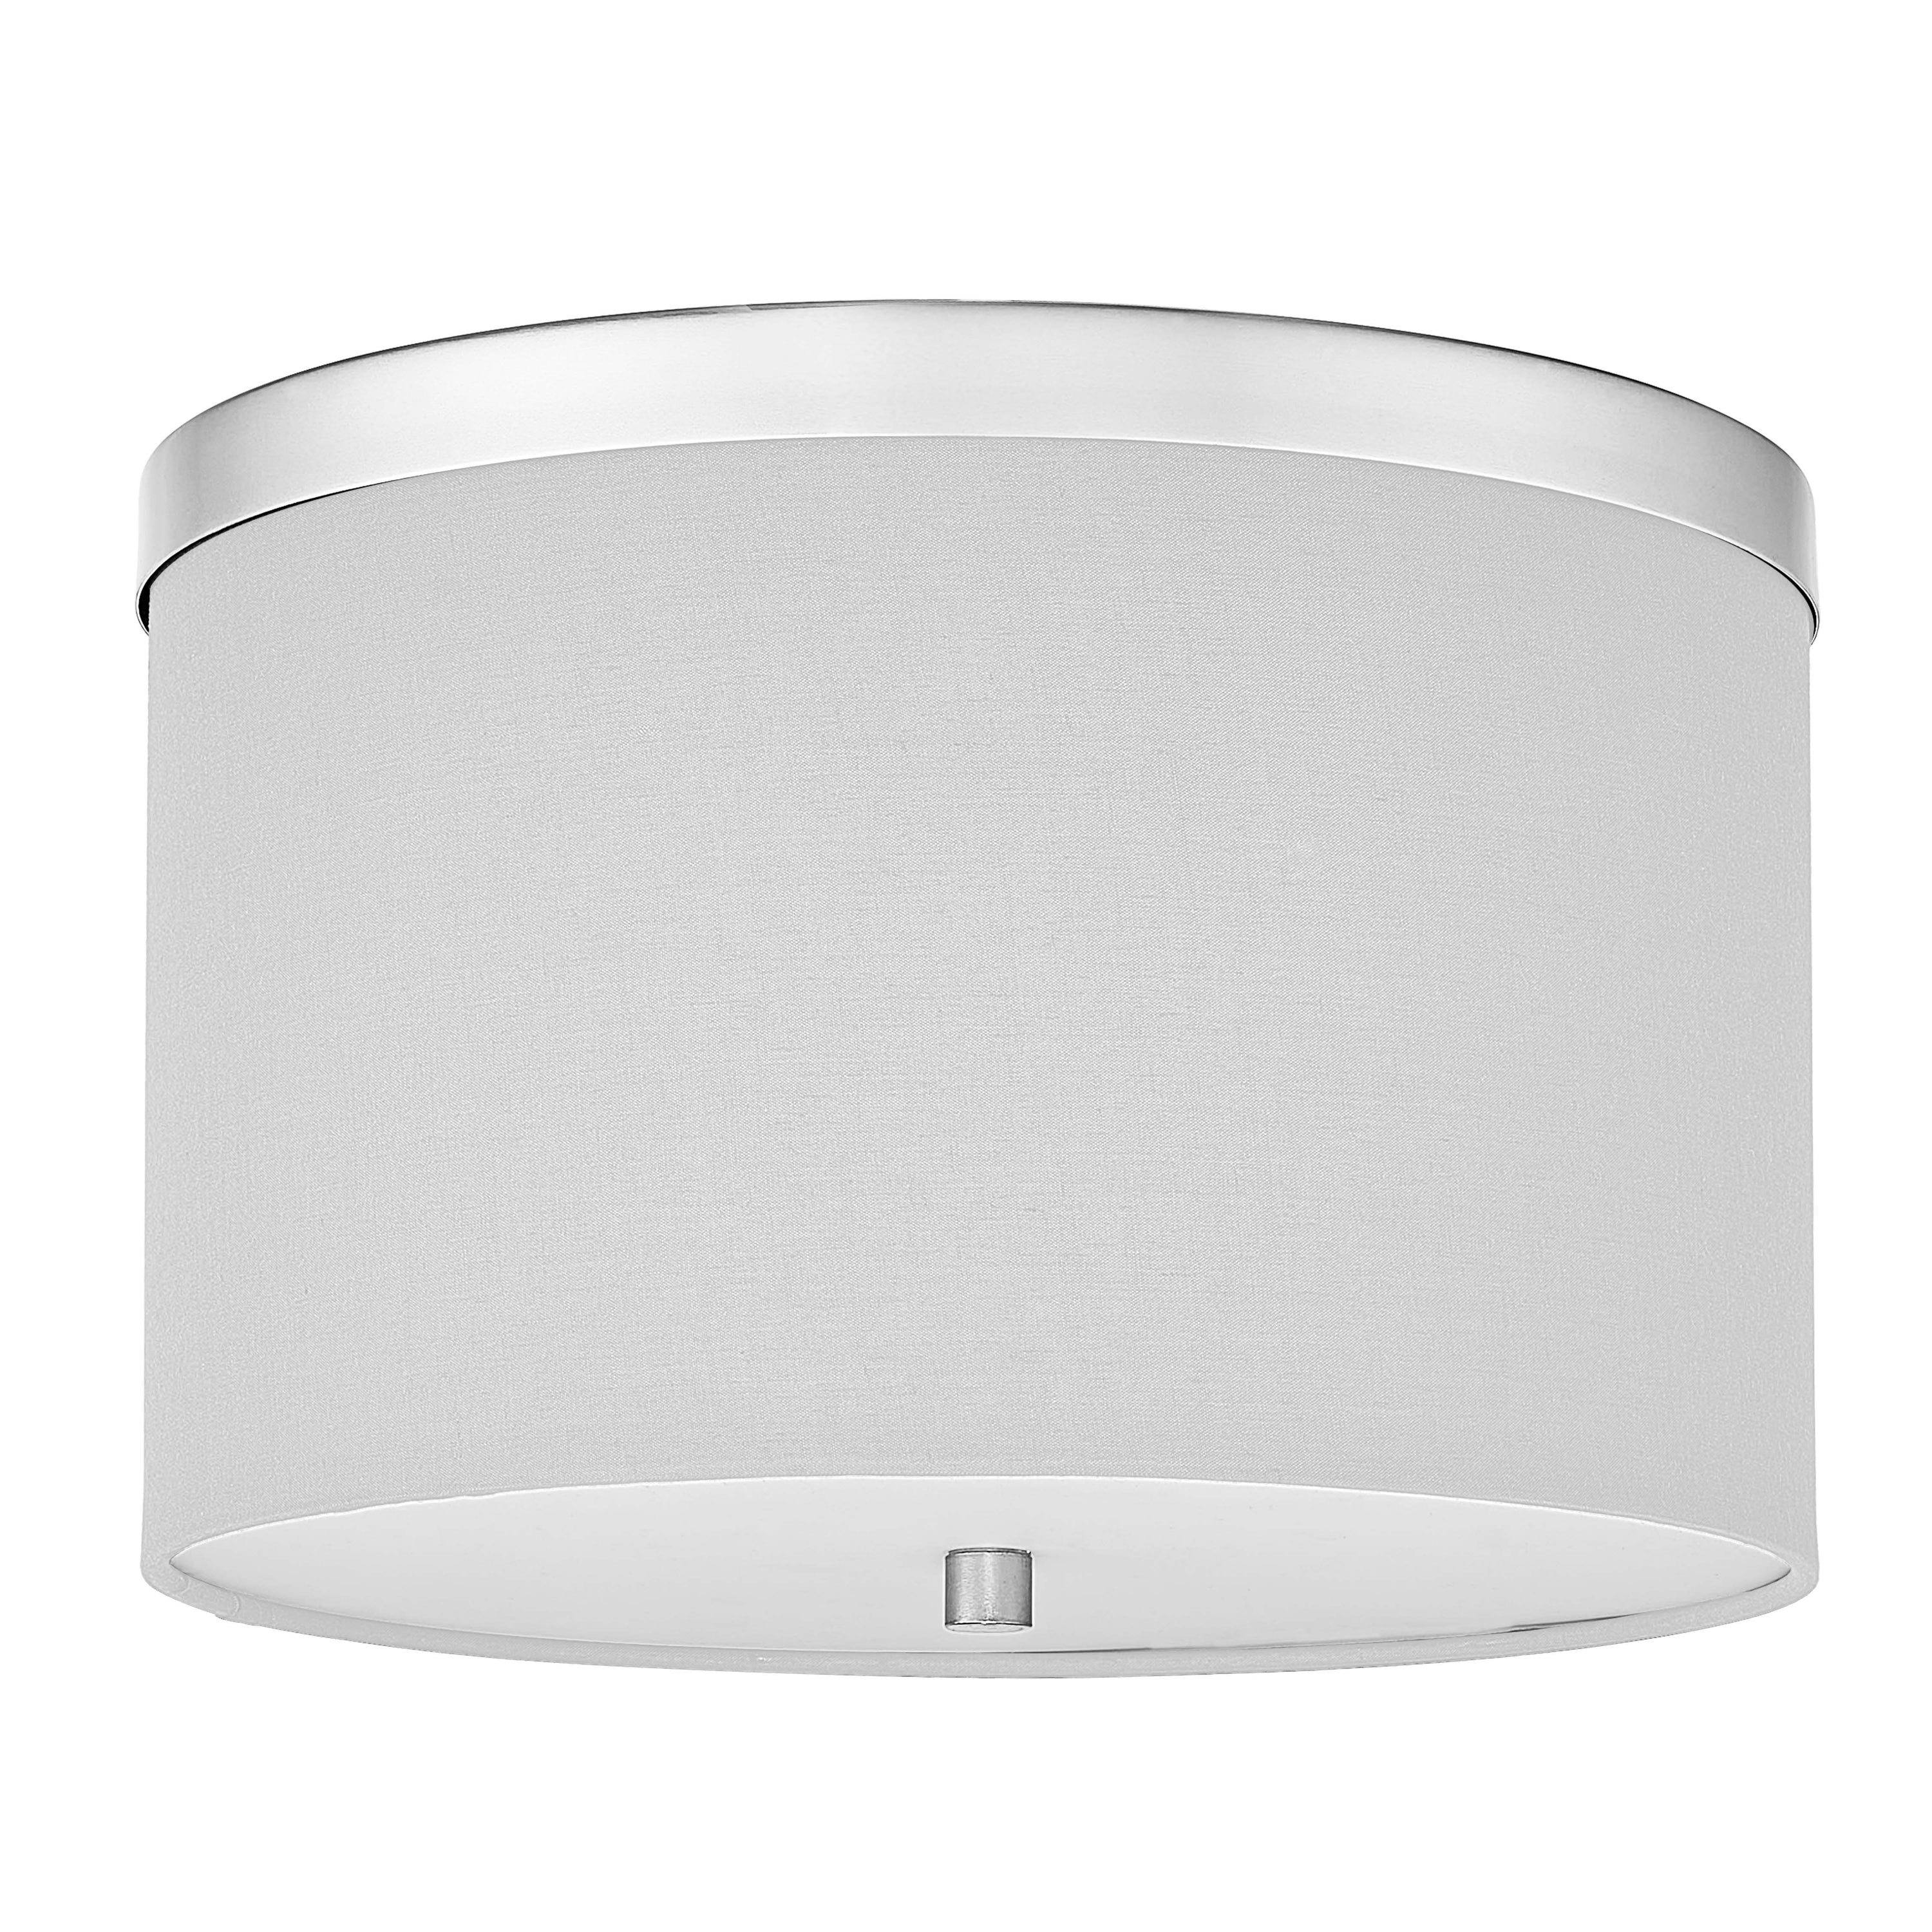 Dainolite FRD-122FH-PC-WH 2 Light Incandescent Flush Mount Polished Chrome with White Shade